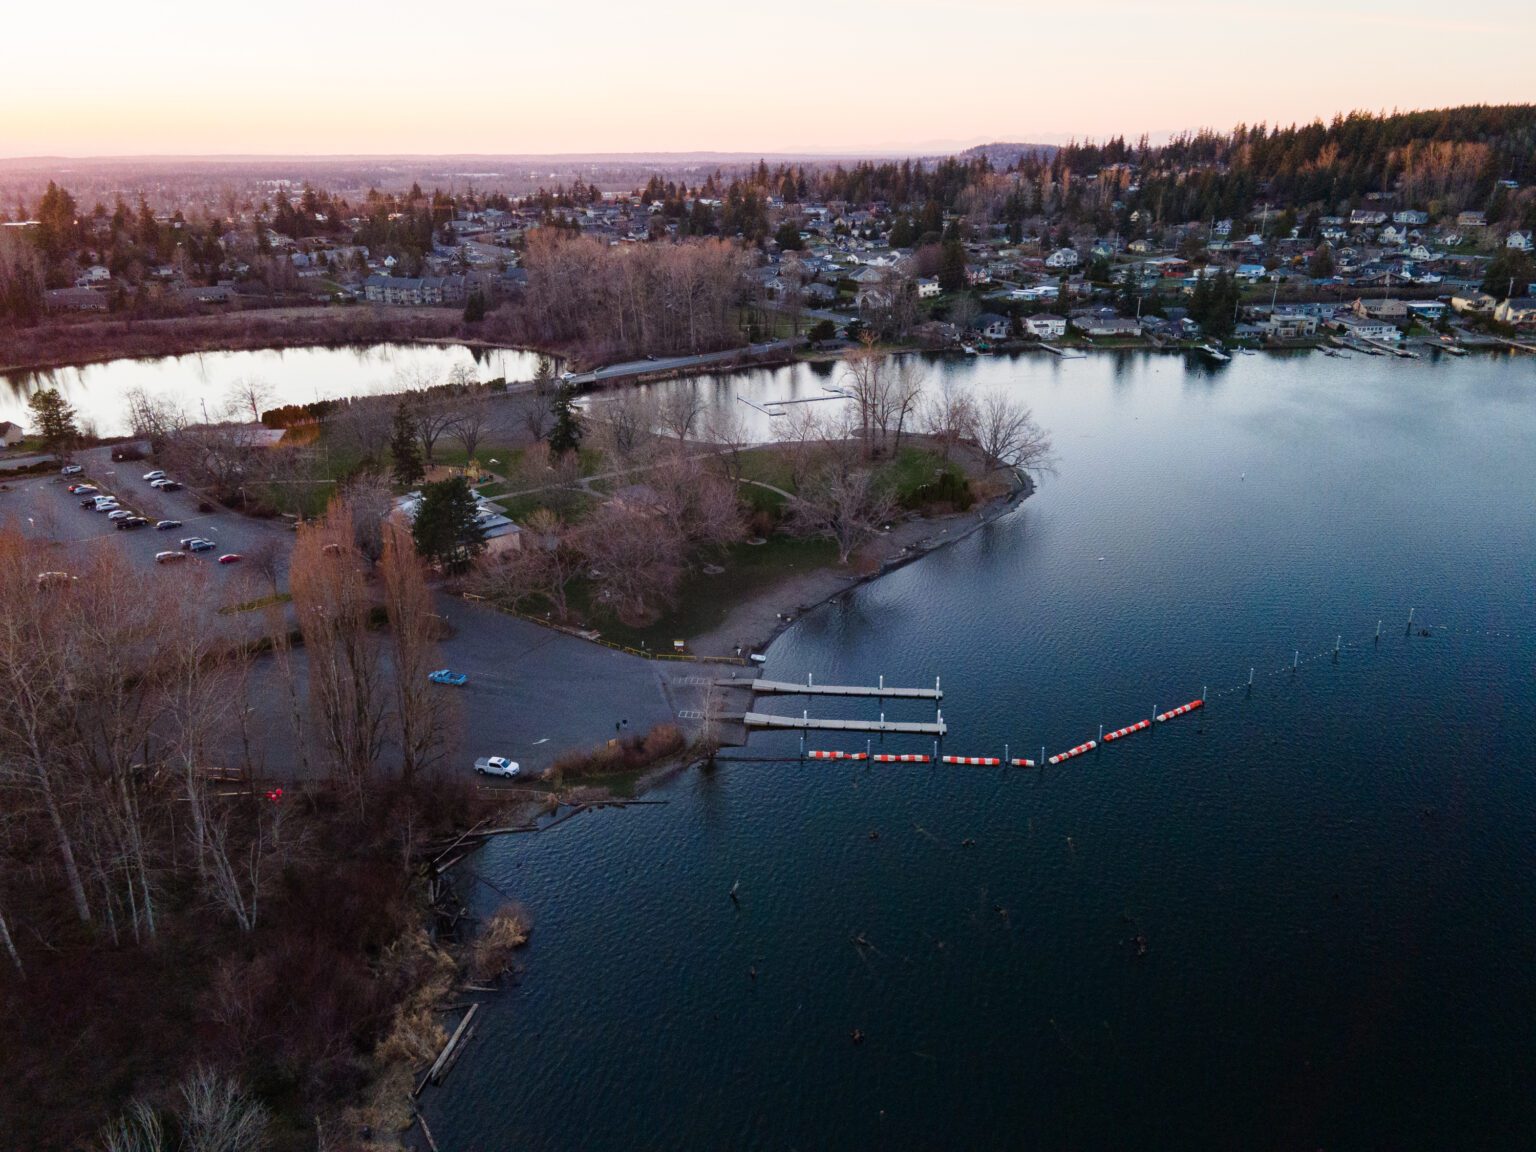 Bellingham City Council approved the purchase of two new properties in the Lake Whatcom watershed as part of the Lake Whatcom Land Acquisition and Preservation program during Monday's council meeting.